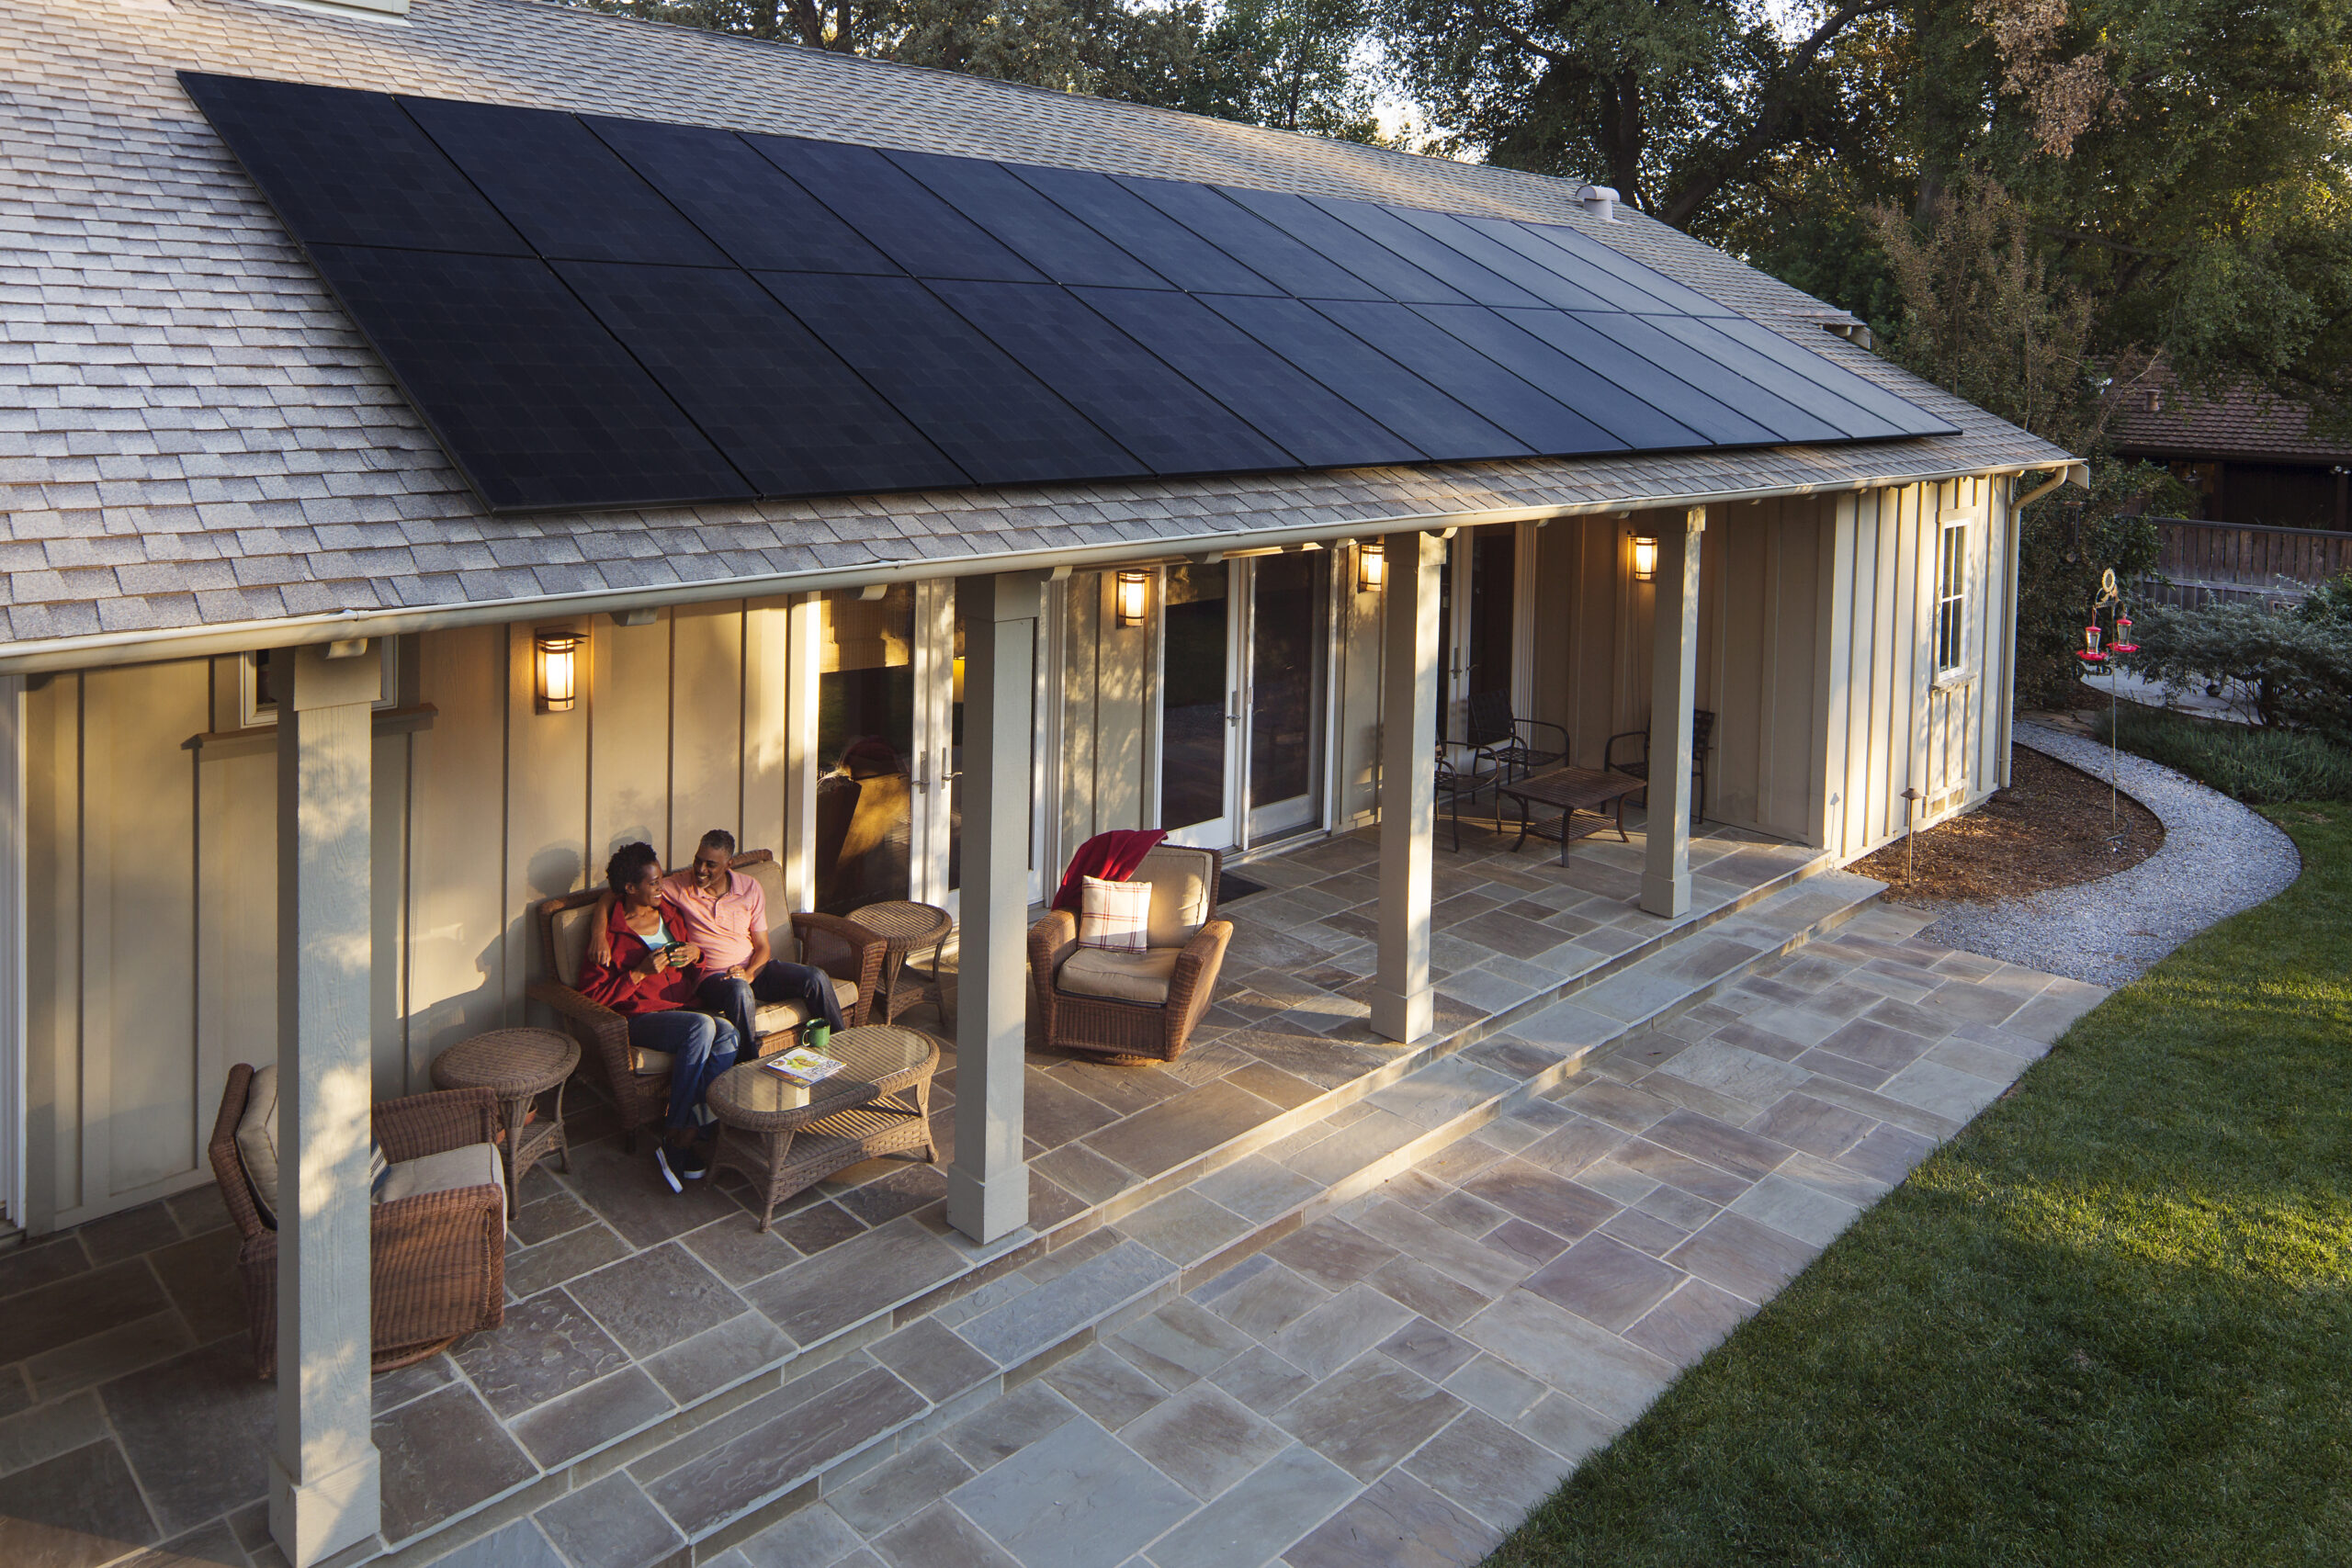 Free Home Solar Power In Maryland - CleanTechnica